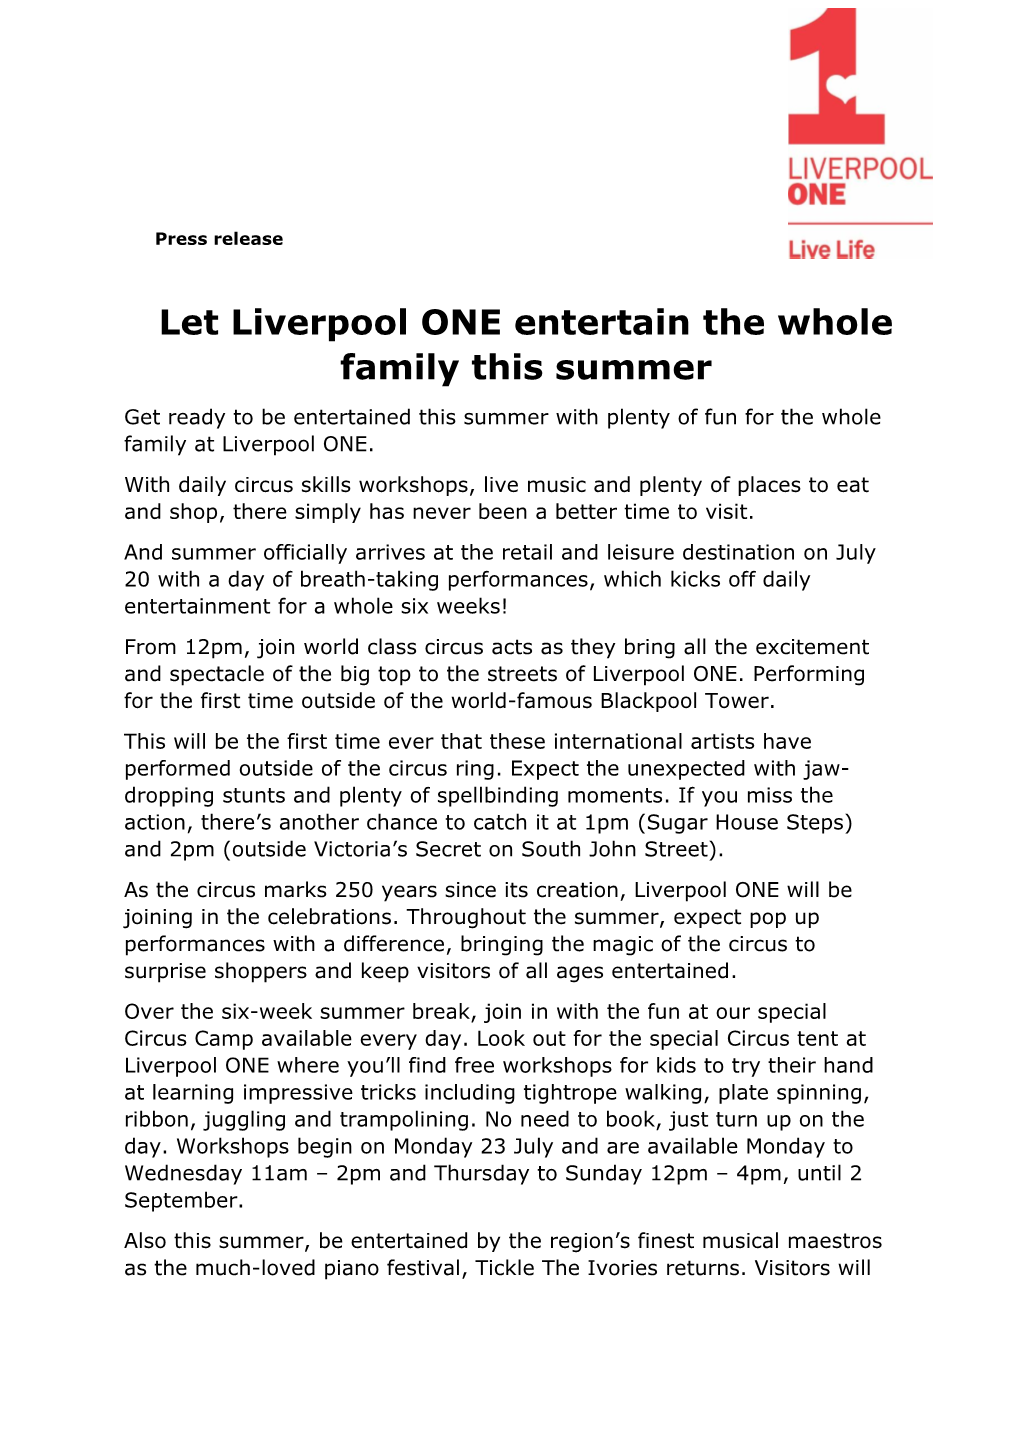 Let Liverpool ONE Entertain the Whole Family This Summer